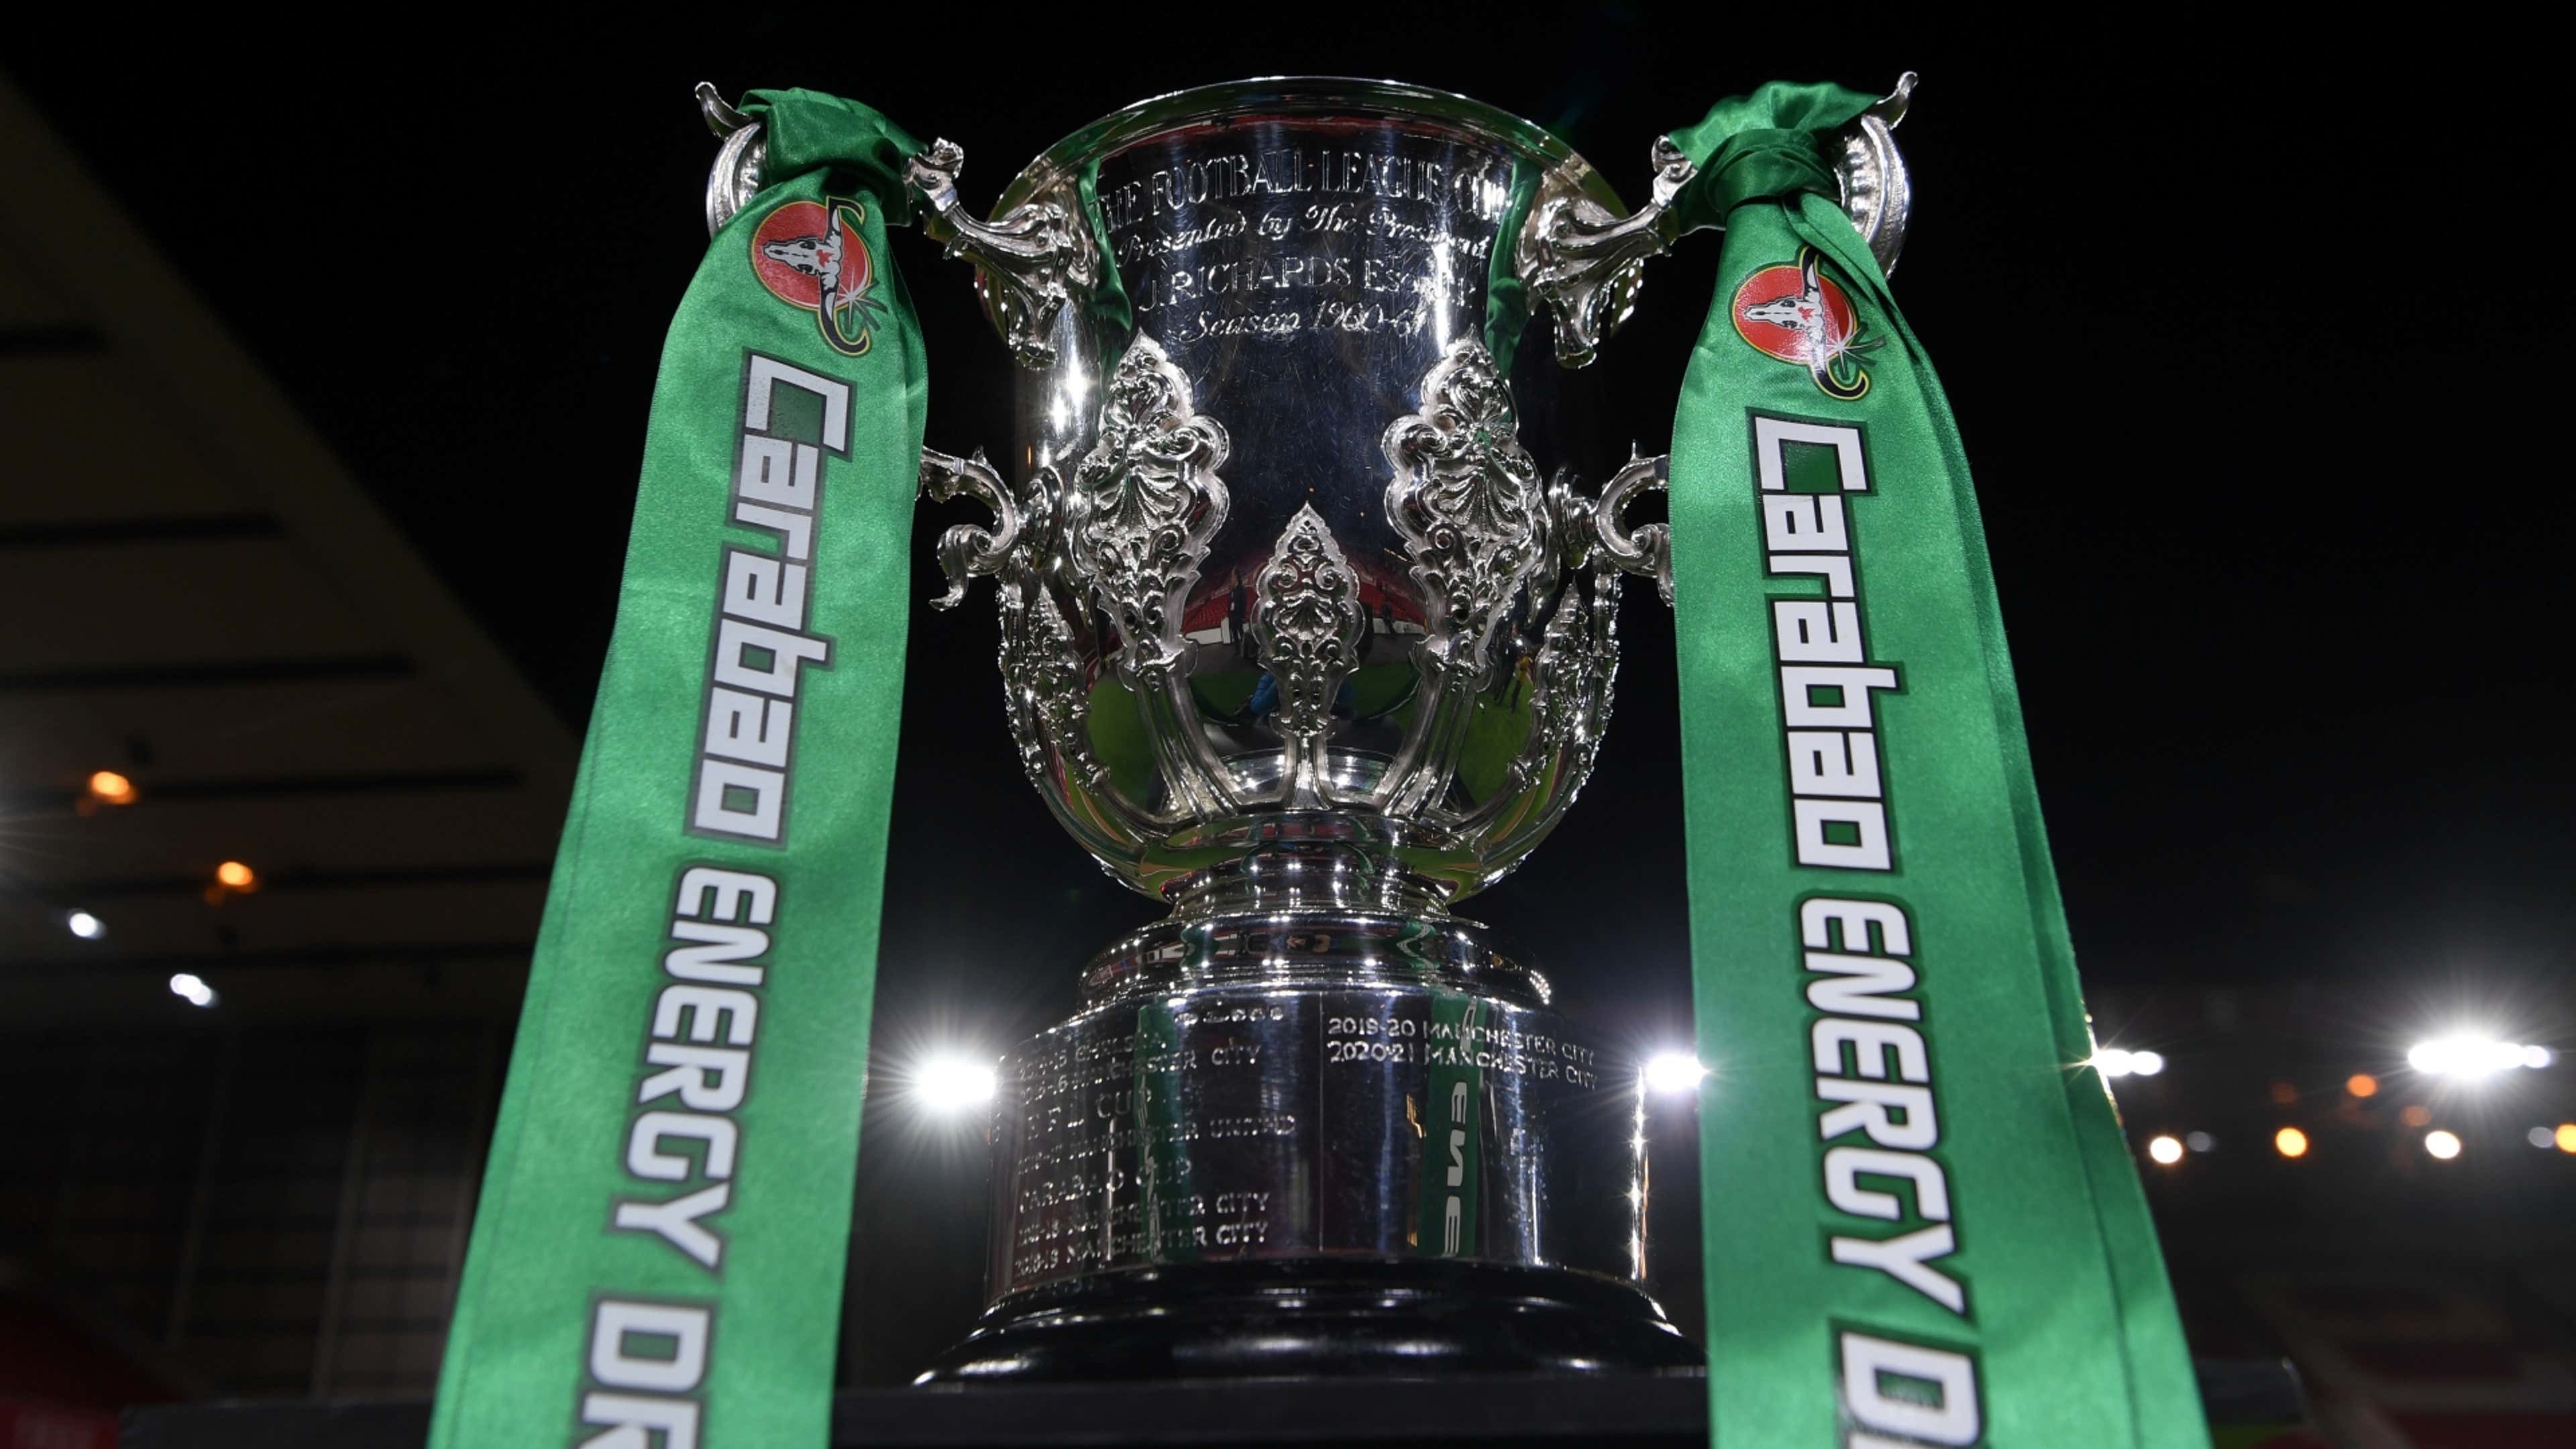 Leagues Cup 2023: All you need to know